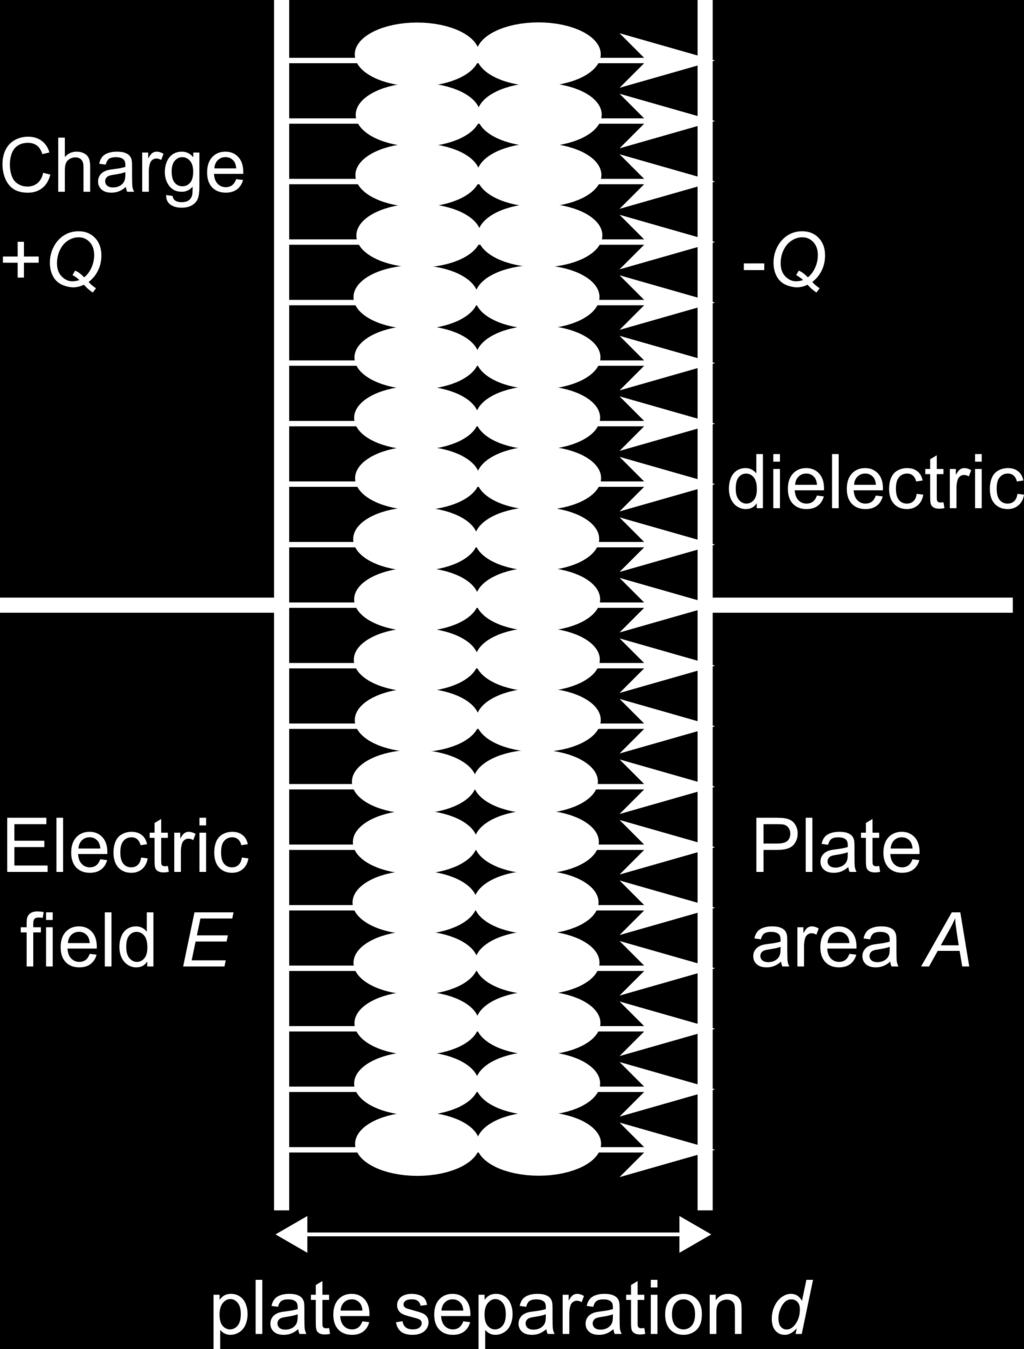 Capacitor (Review) A capacitor is a passive two-terminal electrical component that